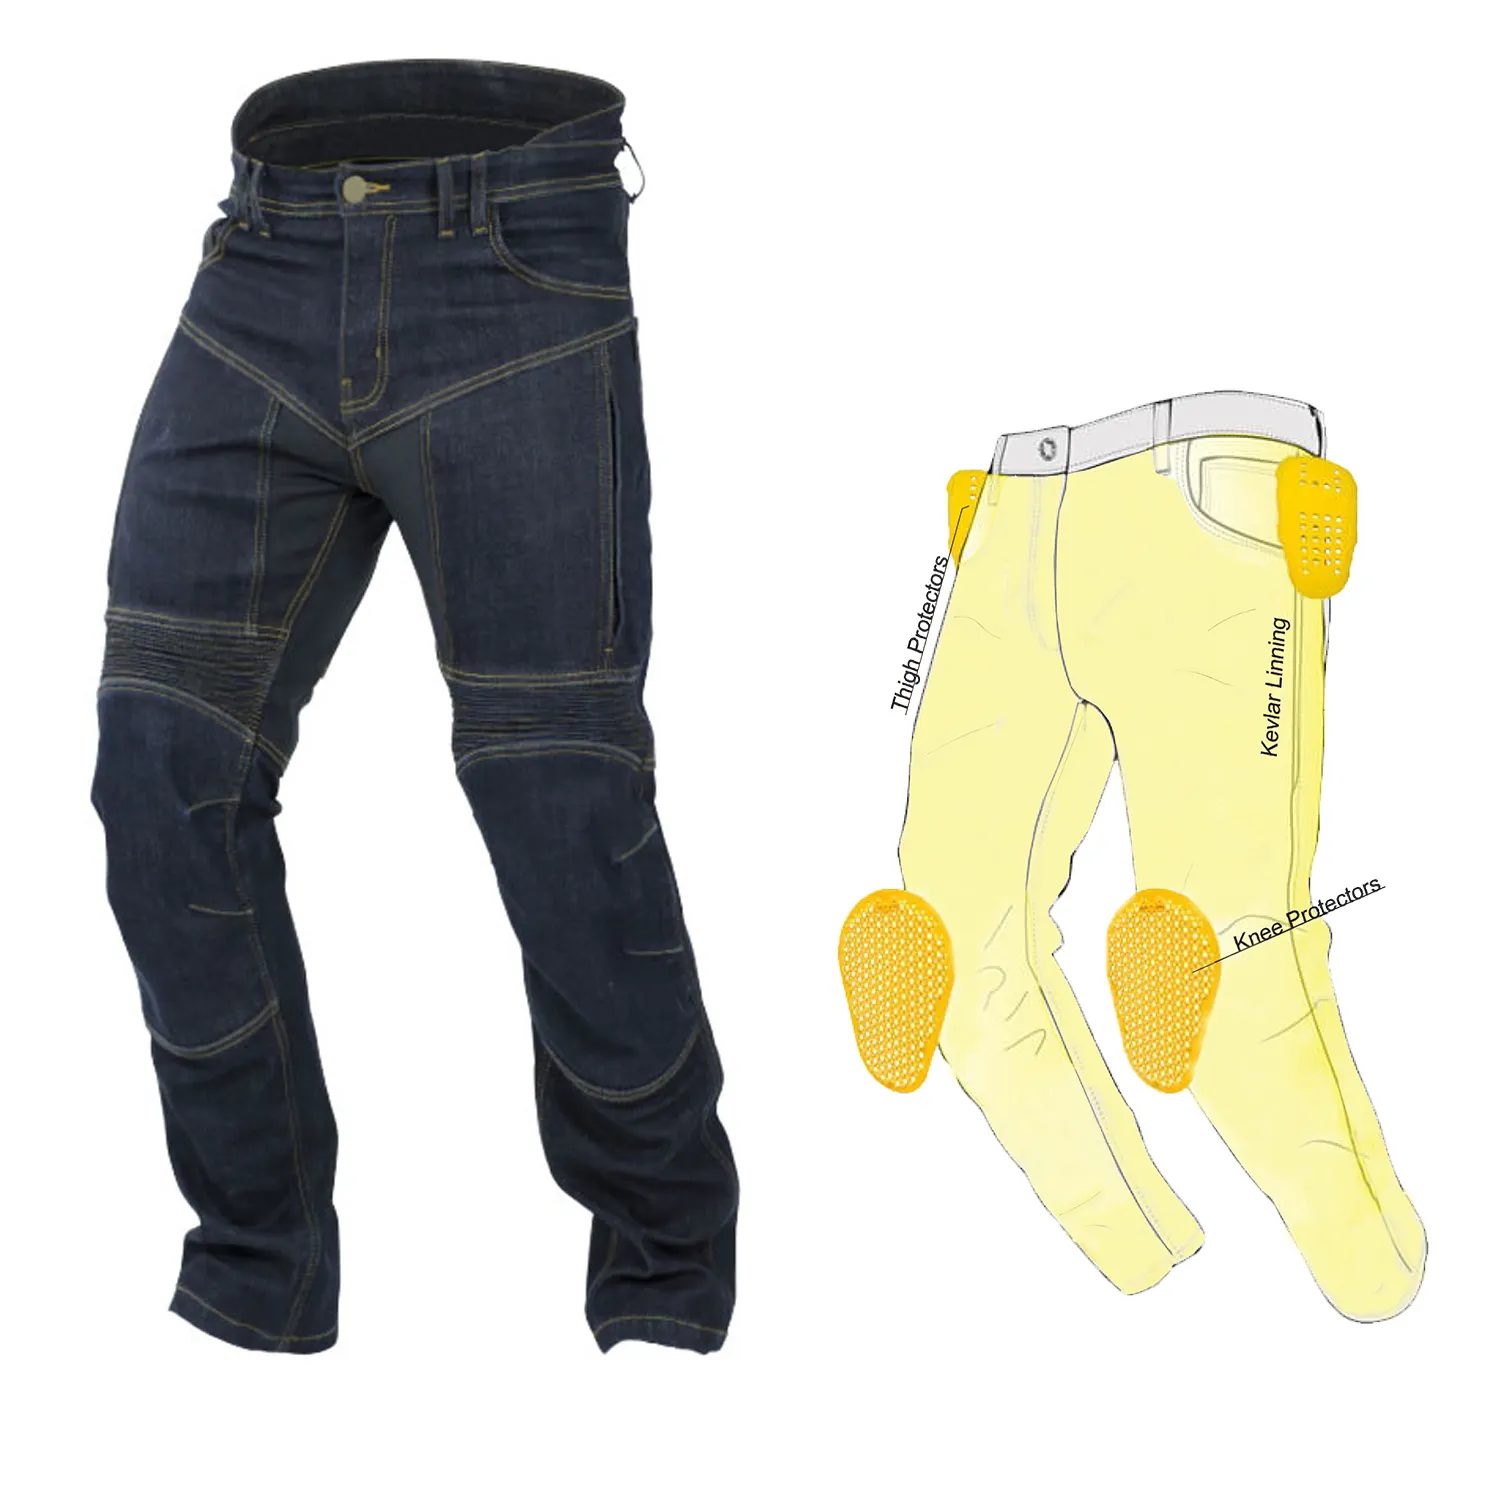 High quality reinforced style Aramid lining AA Rated denim for women, European style jeans for ladies, Prime Protection